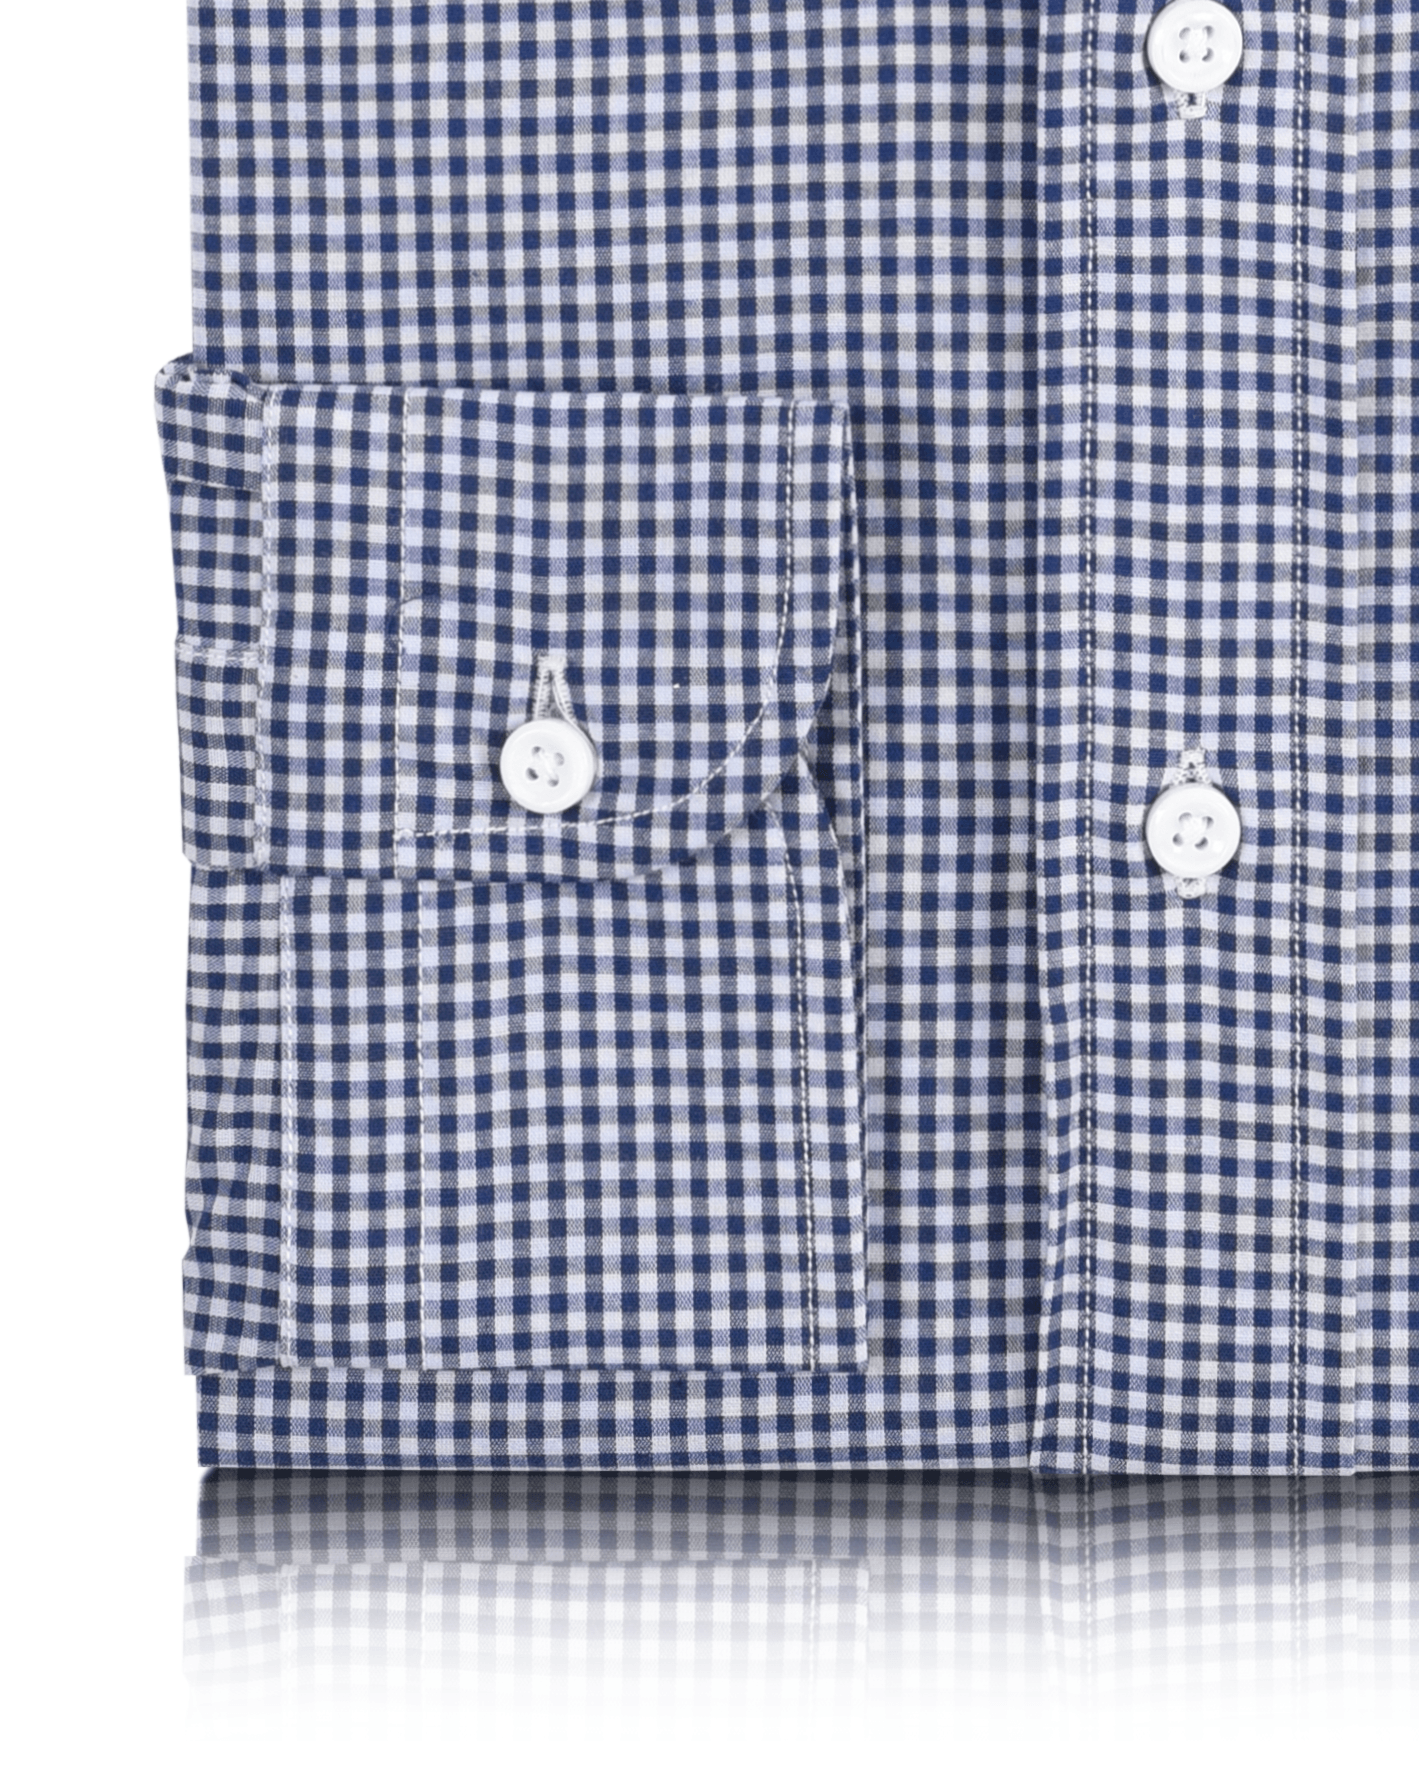 Cuff of the custom oxford shirt for men by Luxire in blue gingham with checks